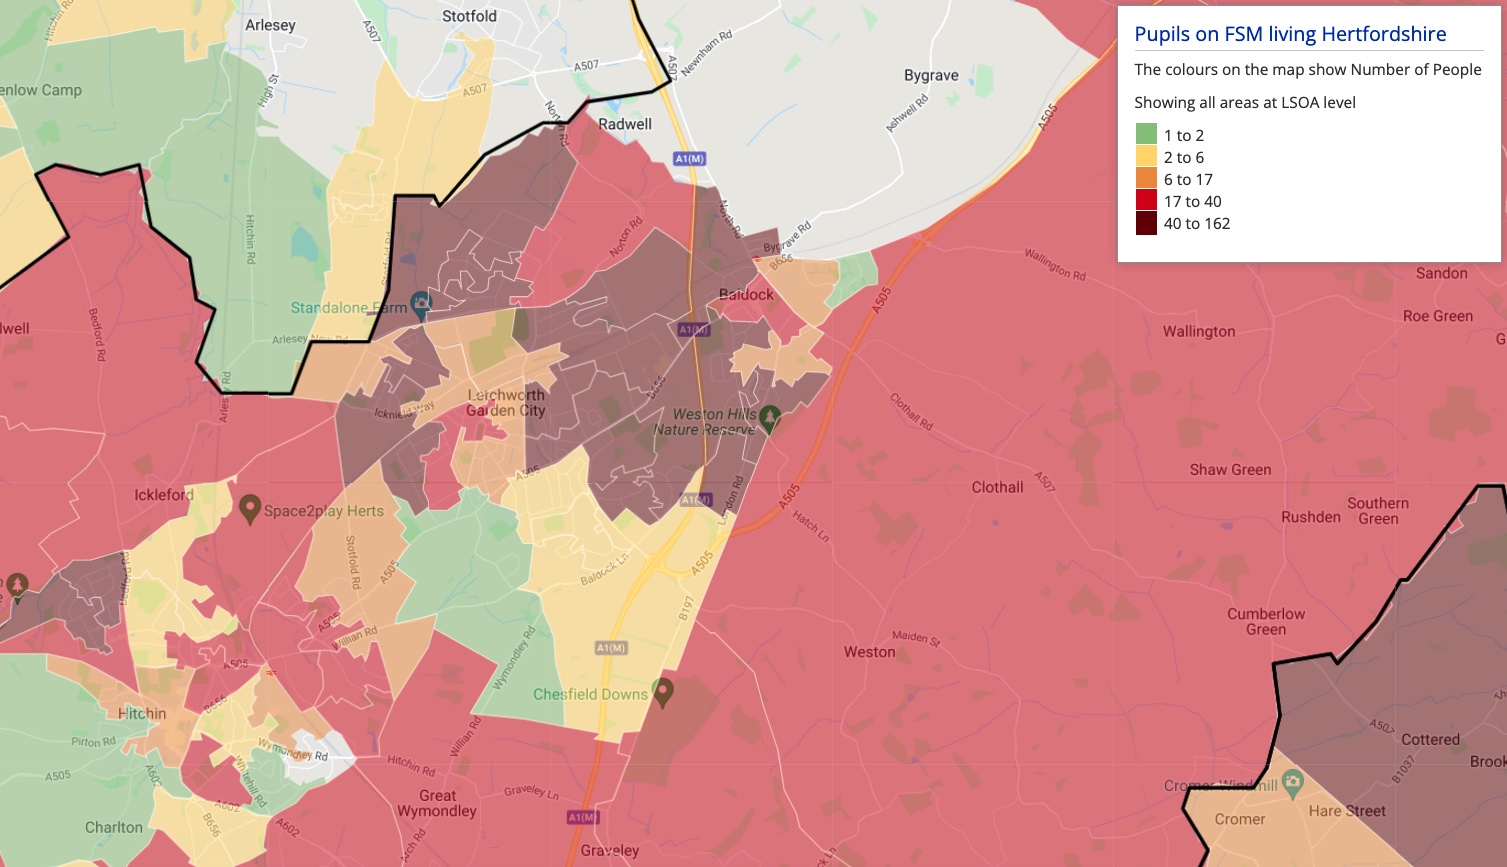 Heat Map showing distribution of Pupils on FSM living in North Hertfordshire.